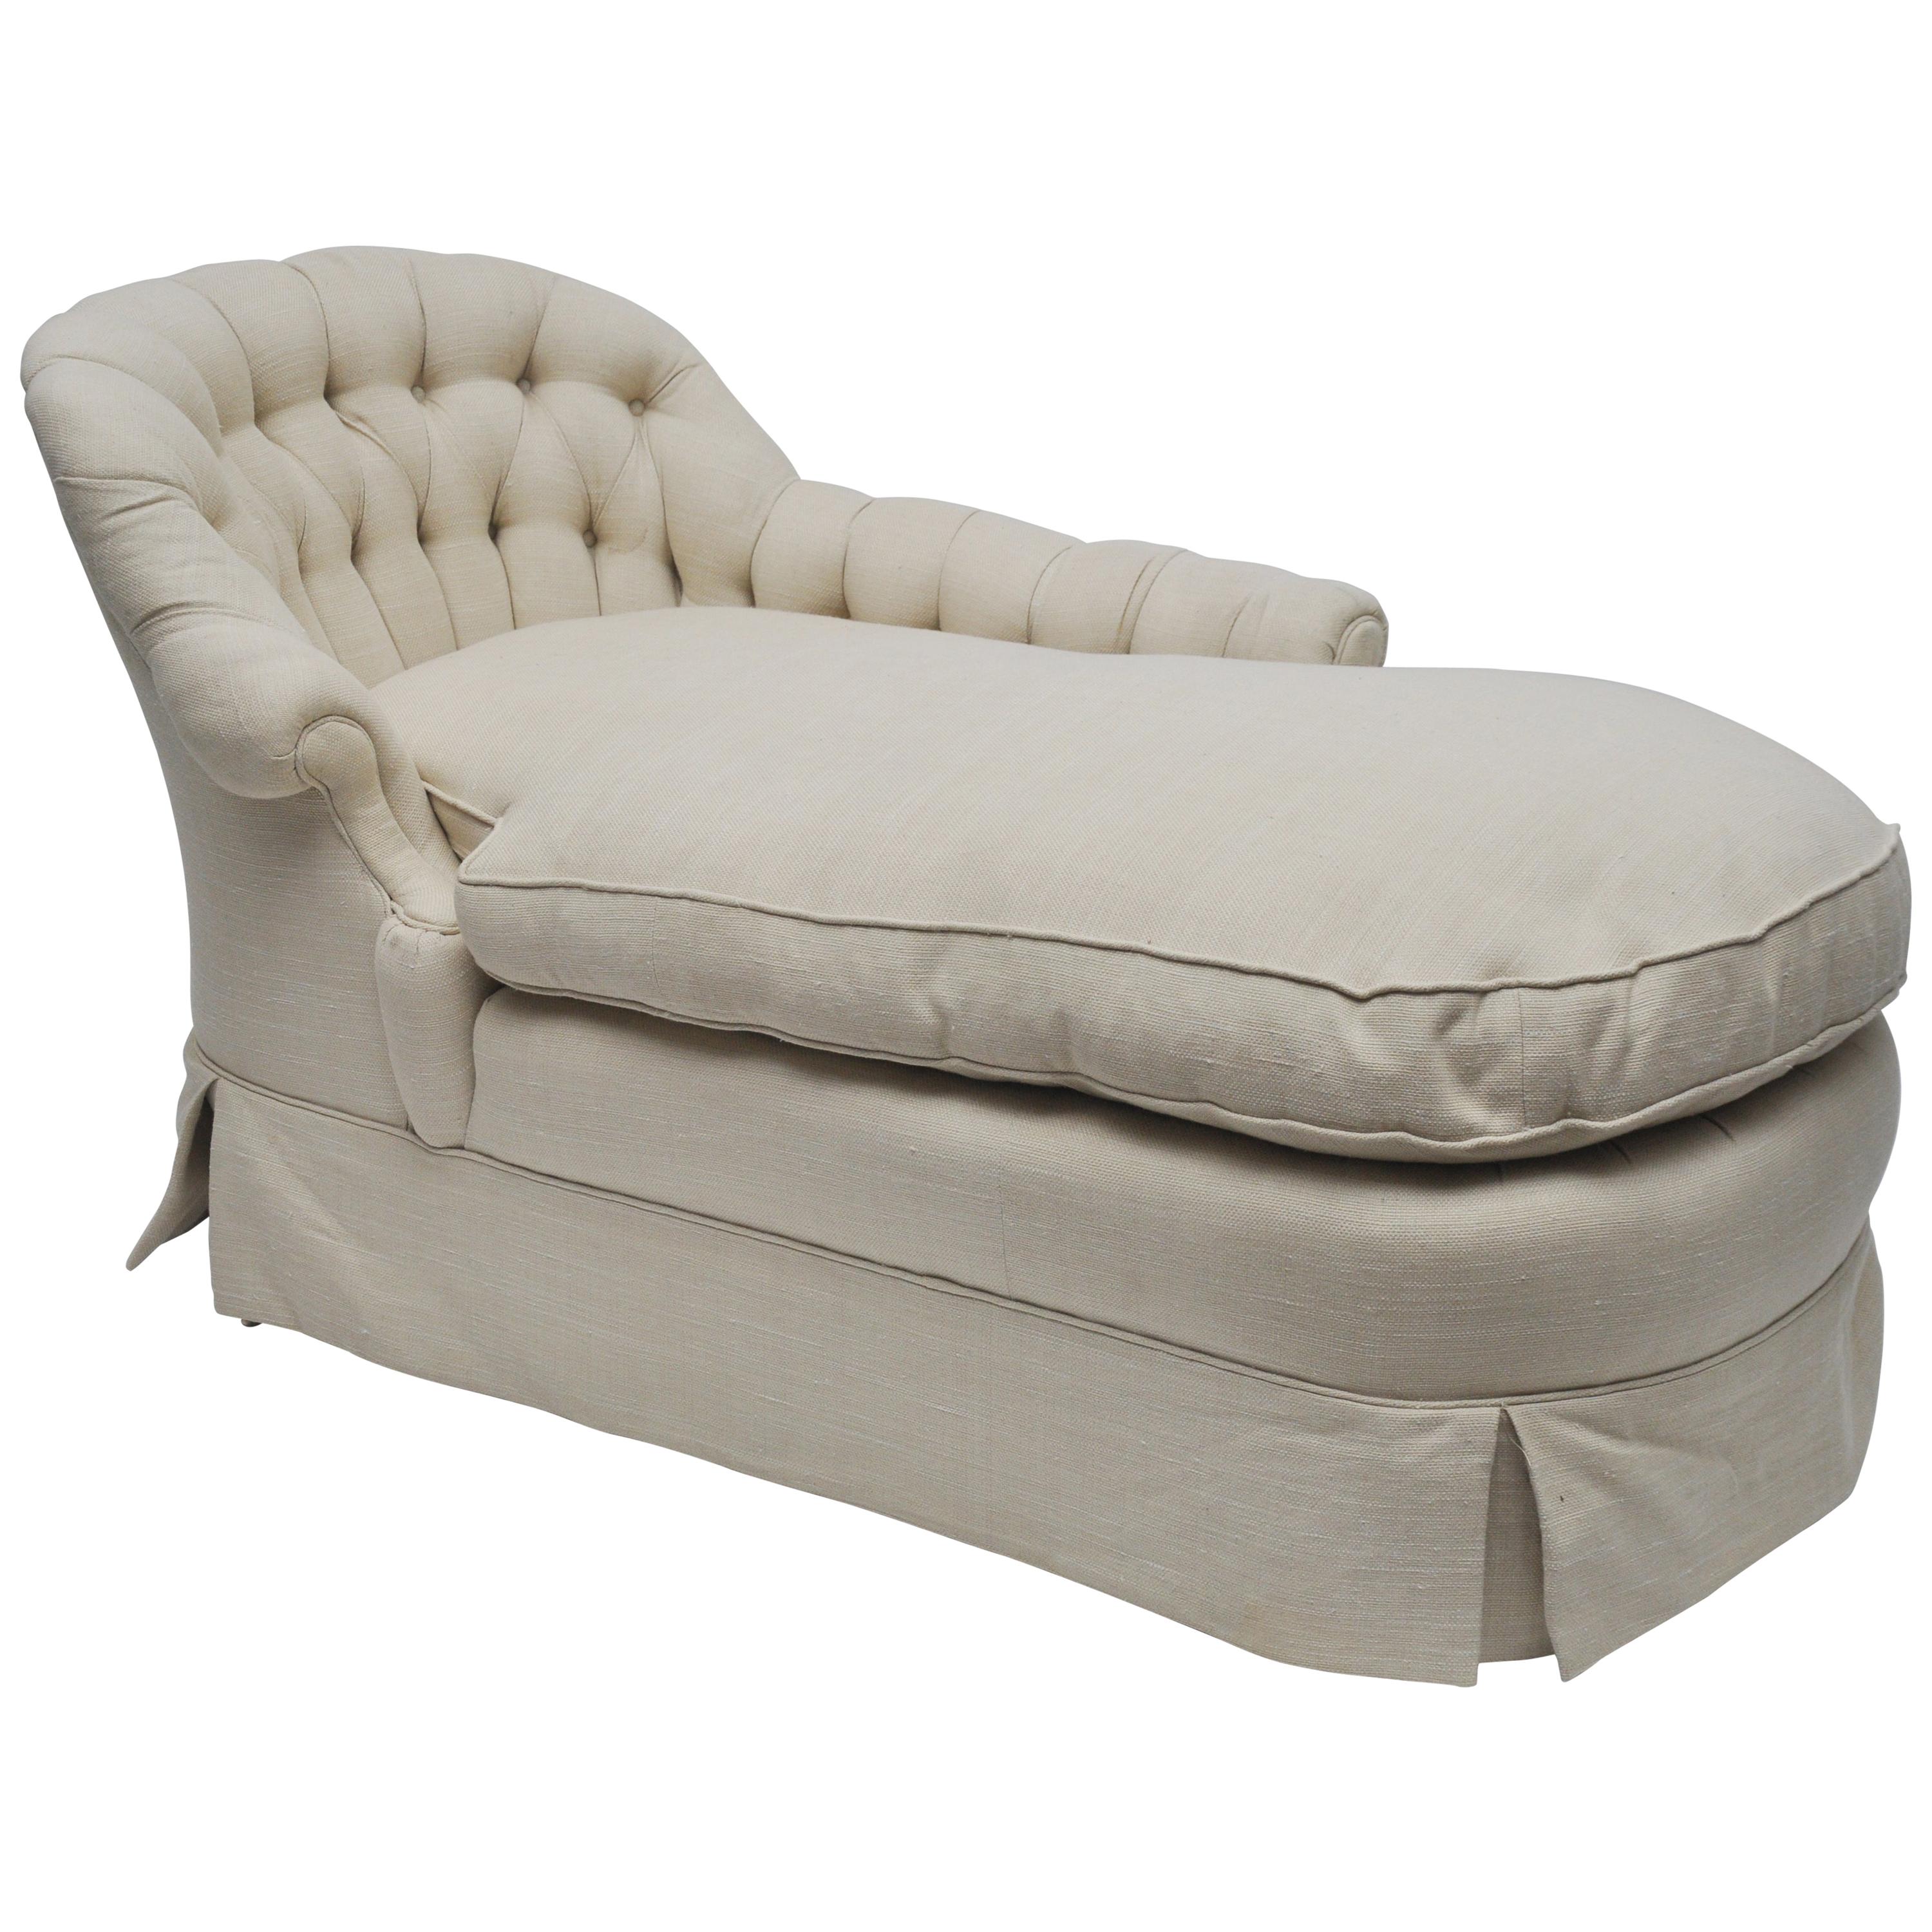 Tufted Back Chaise Lounge Chair